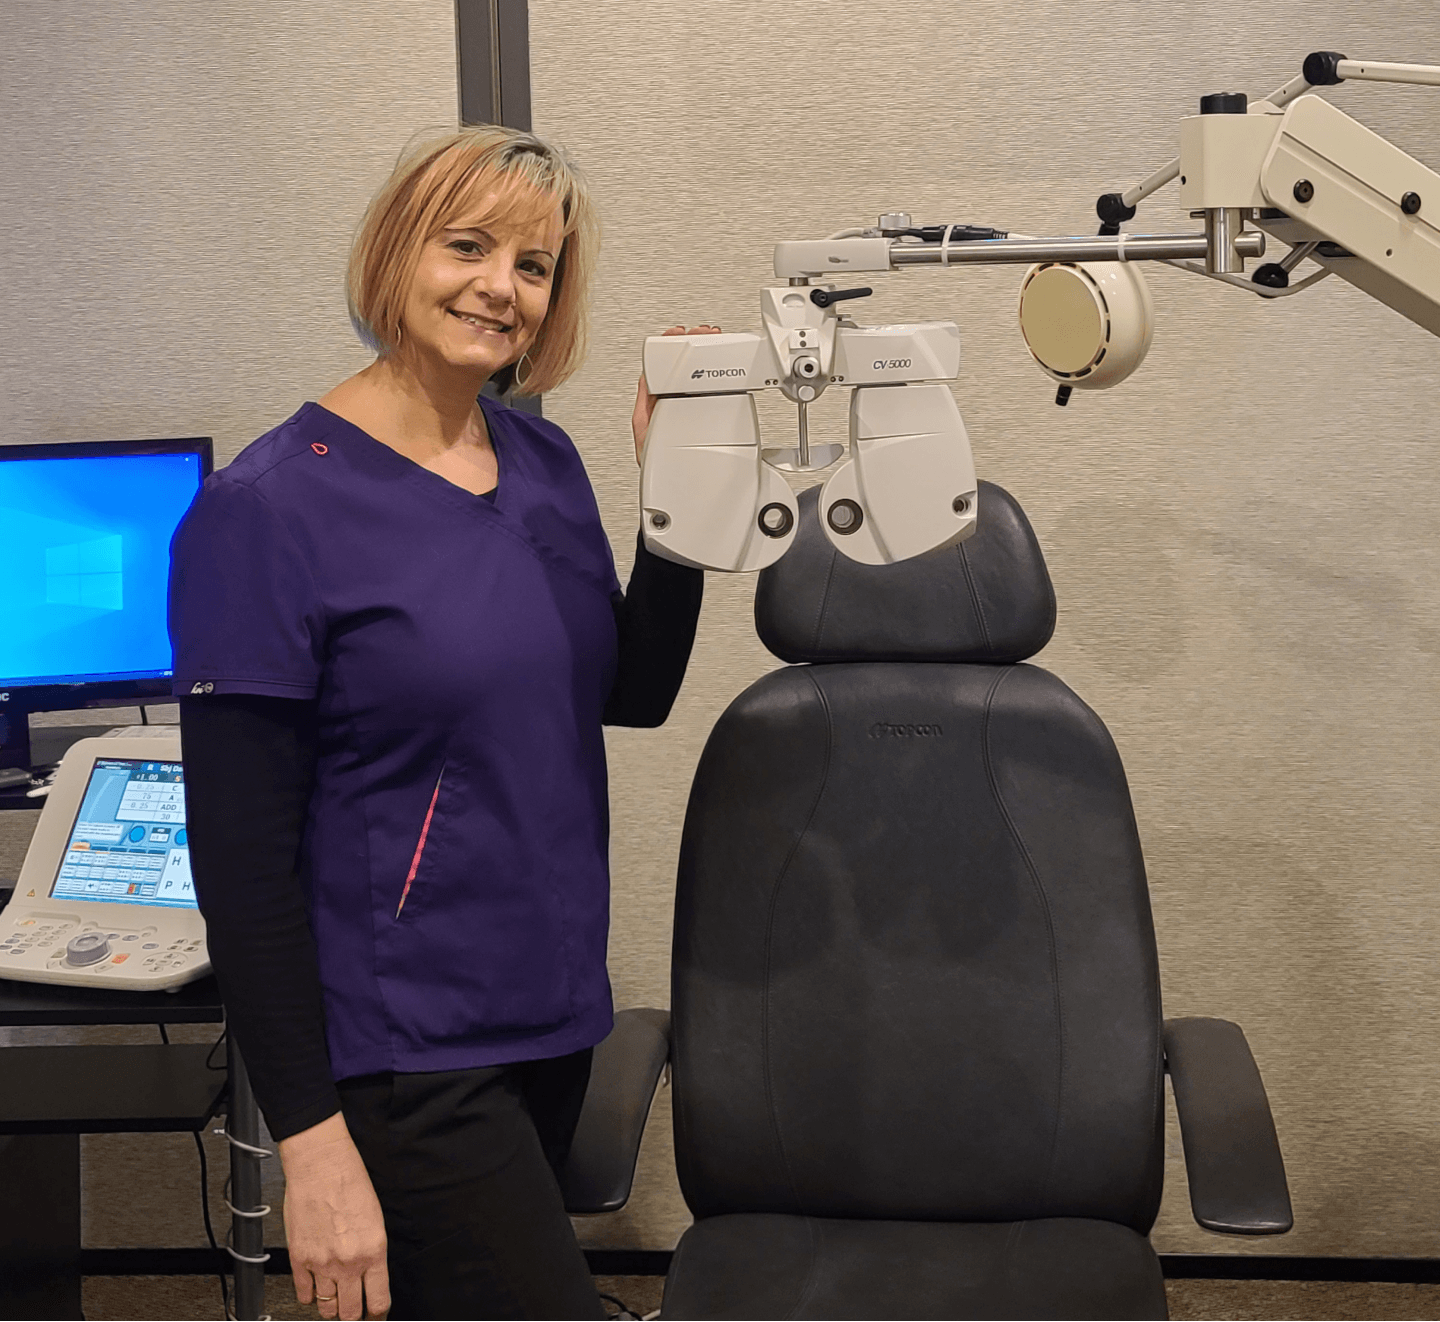 Dr. Tanya Markis | Grass Valley, CA | Grass Valley Eyecare Optometric Inc.